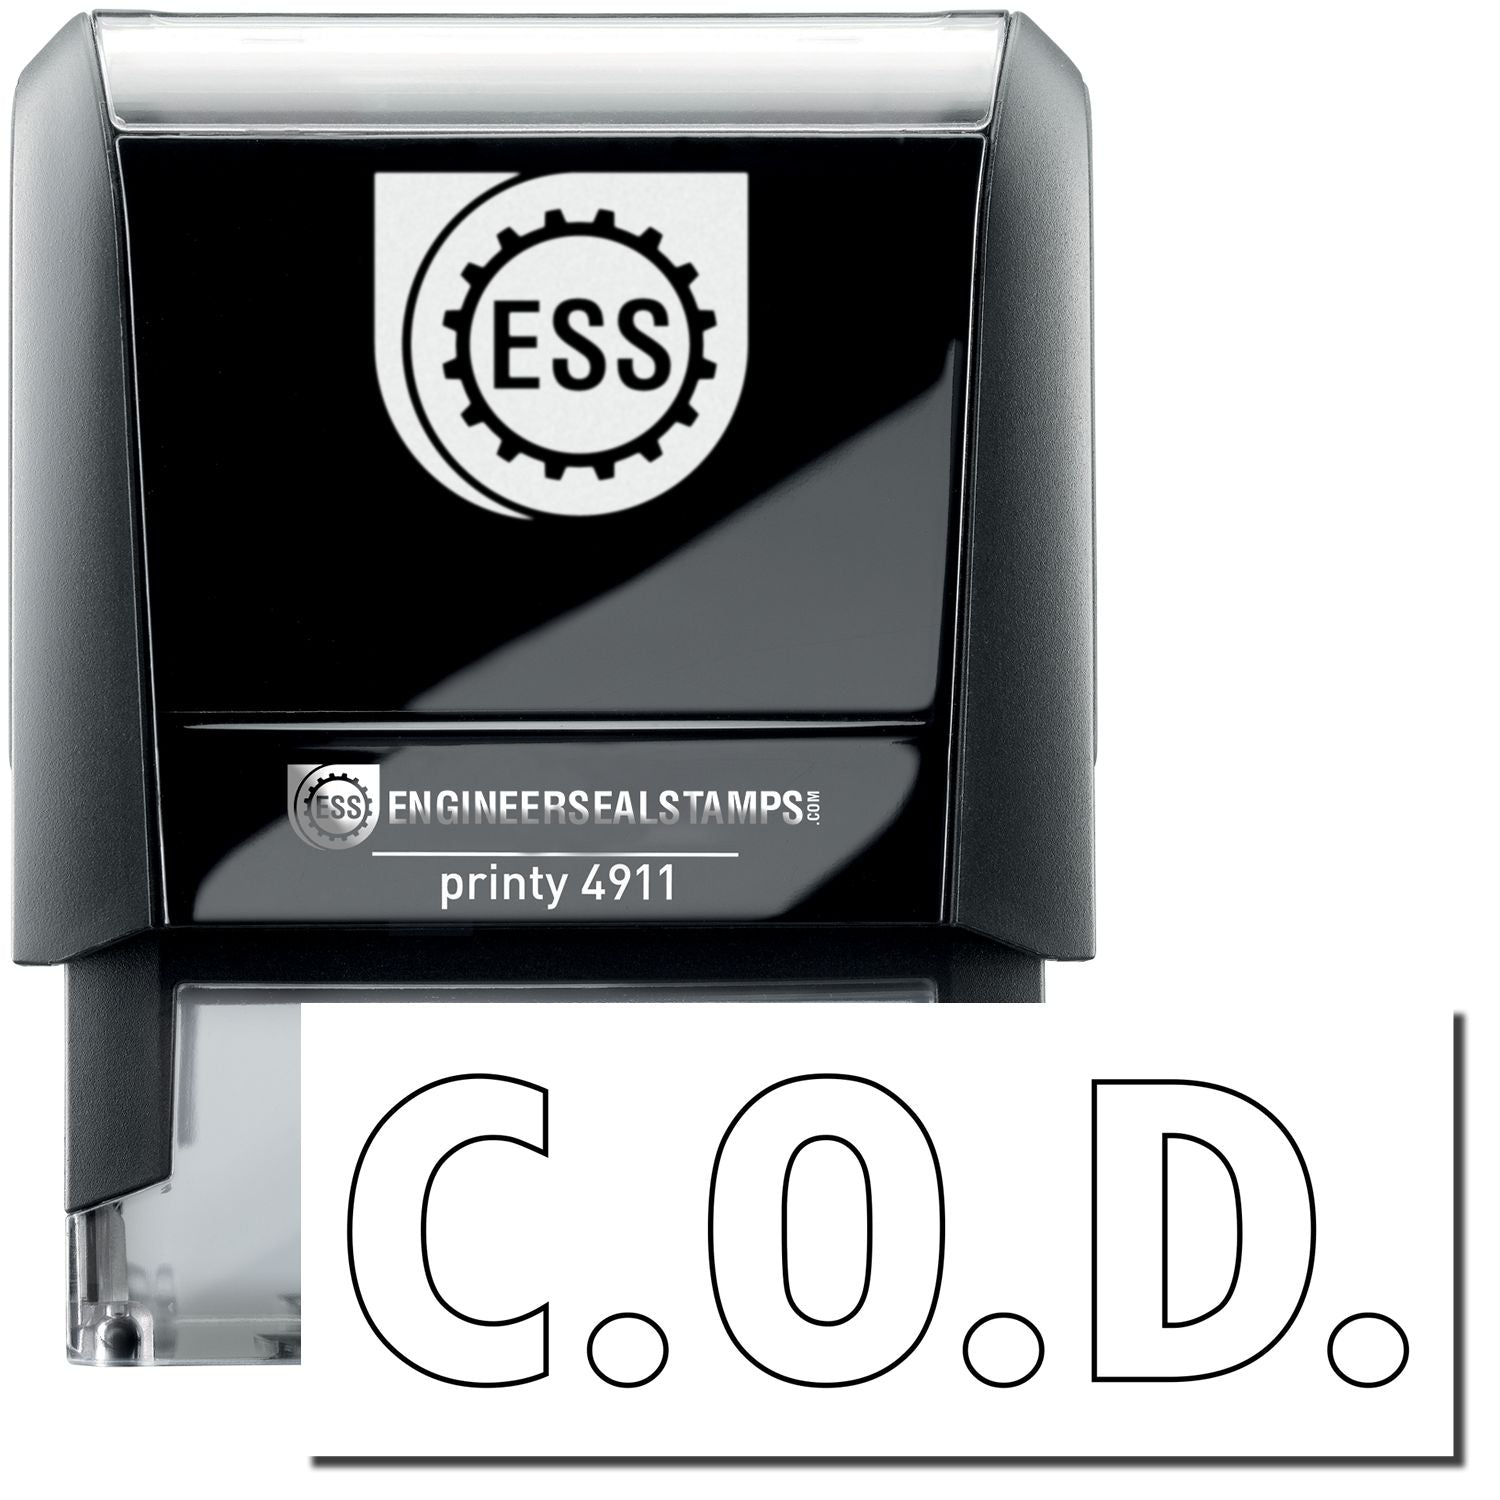 A self-inking stamp with a stamped image showing how the text "C.O.D." in an outline style is displayed after stamping.